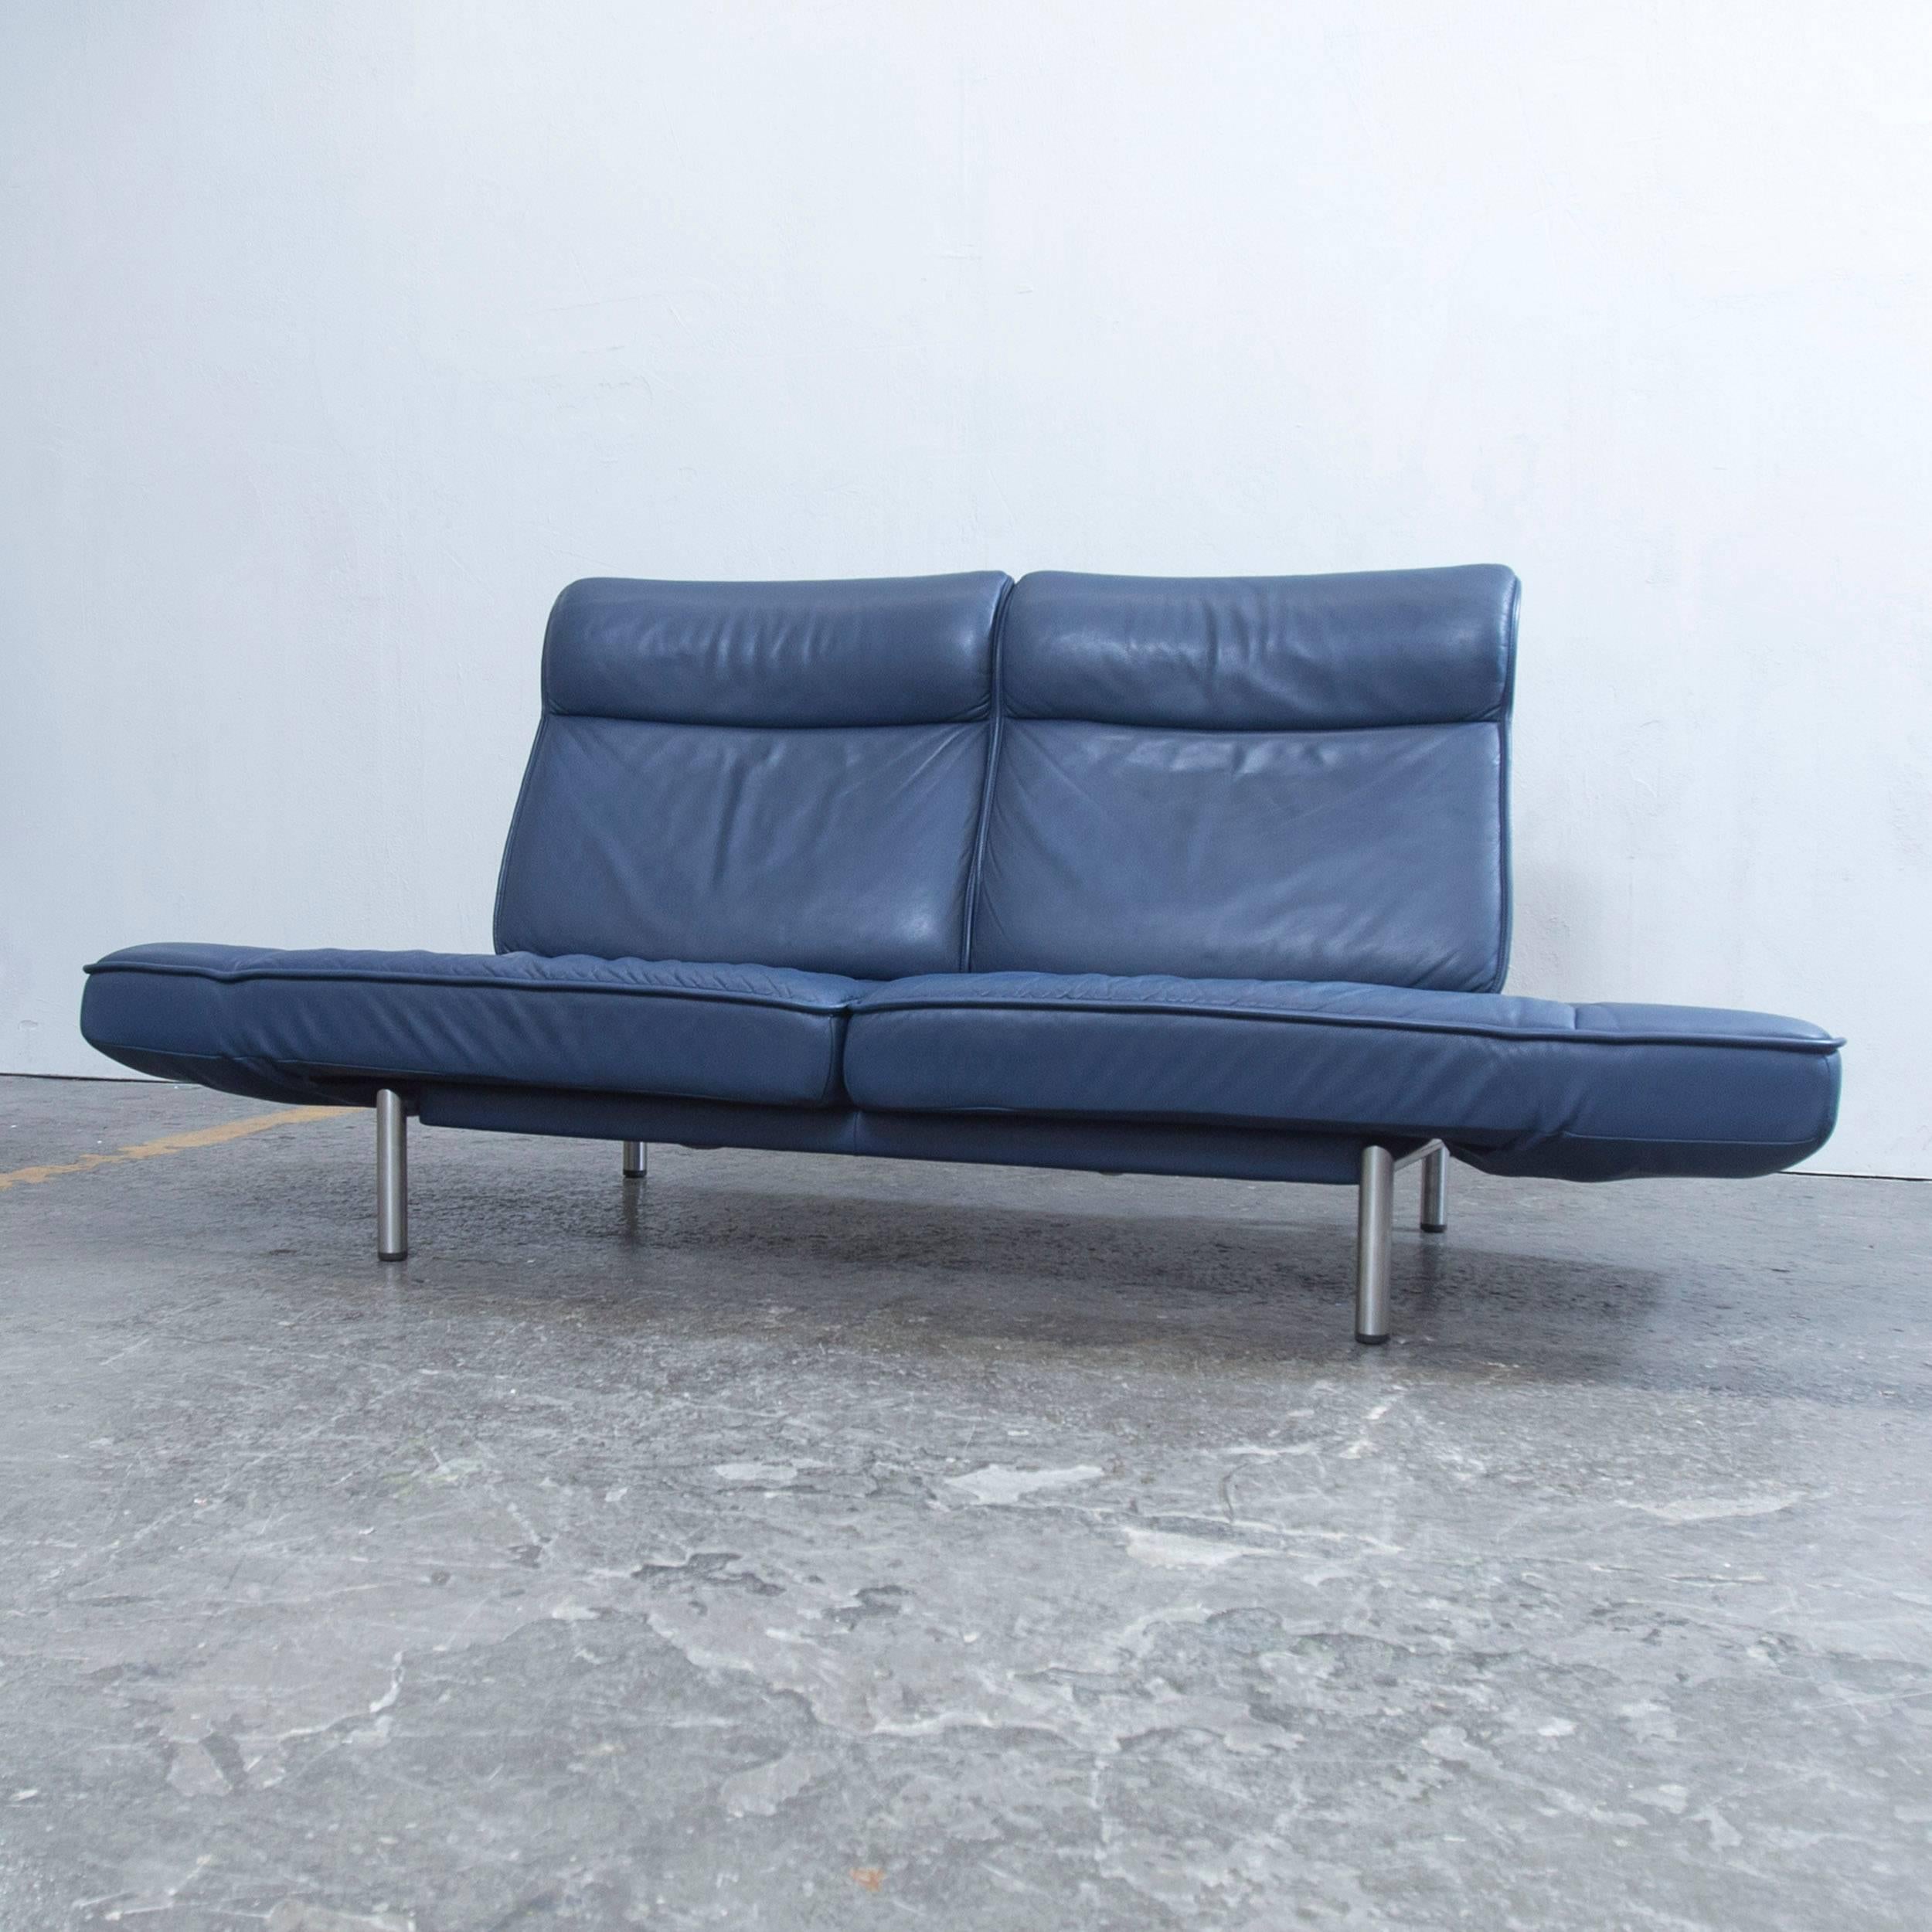 Swiss De Sede DS 450 Designer Leather Sofa Blue Relax Function Two-Seat Modern